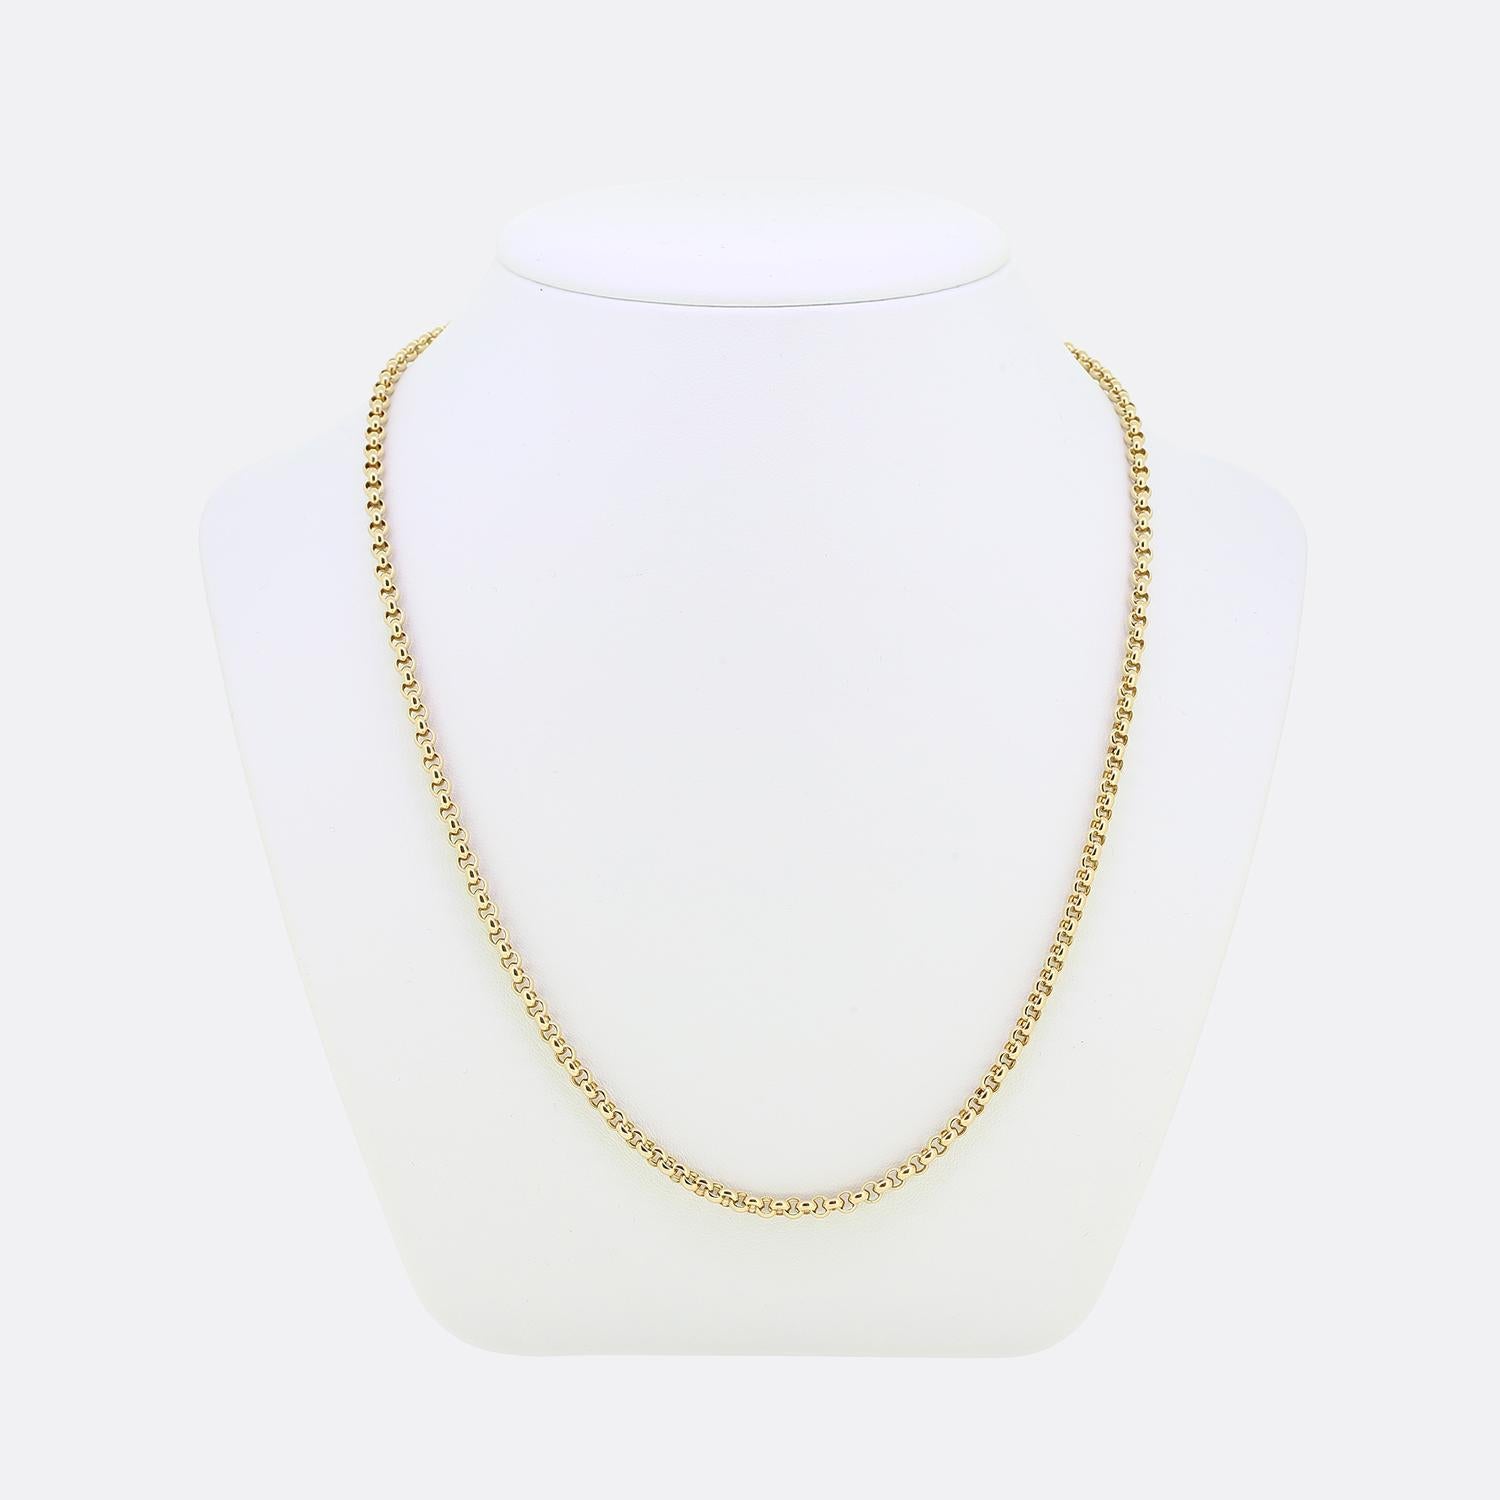 Here we have a classically stylish chain from the world renowned luxury jewellery designer, Chopard. This piece has been crafted from 18ct yellow gold and possesses wide belcher style links. It is a solid 20.0 grams and is perfectly suitable for